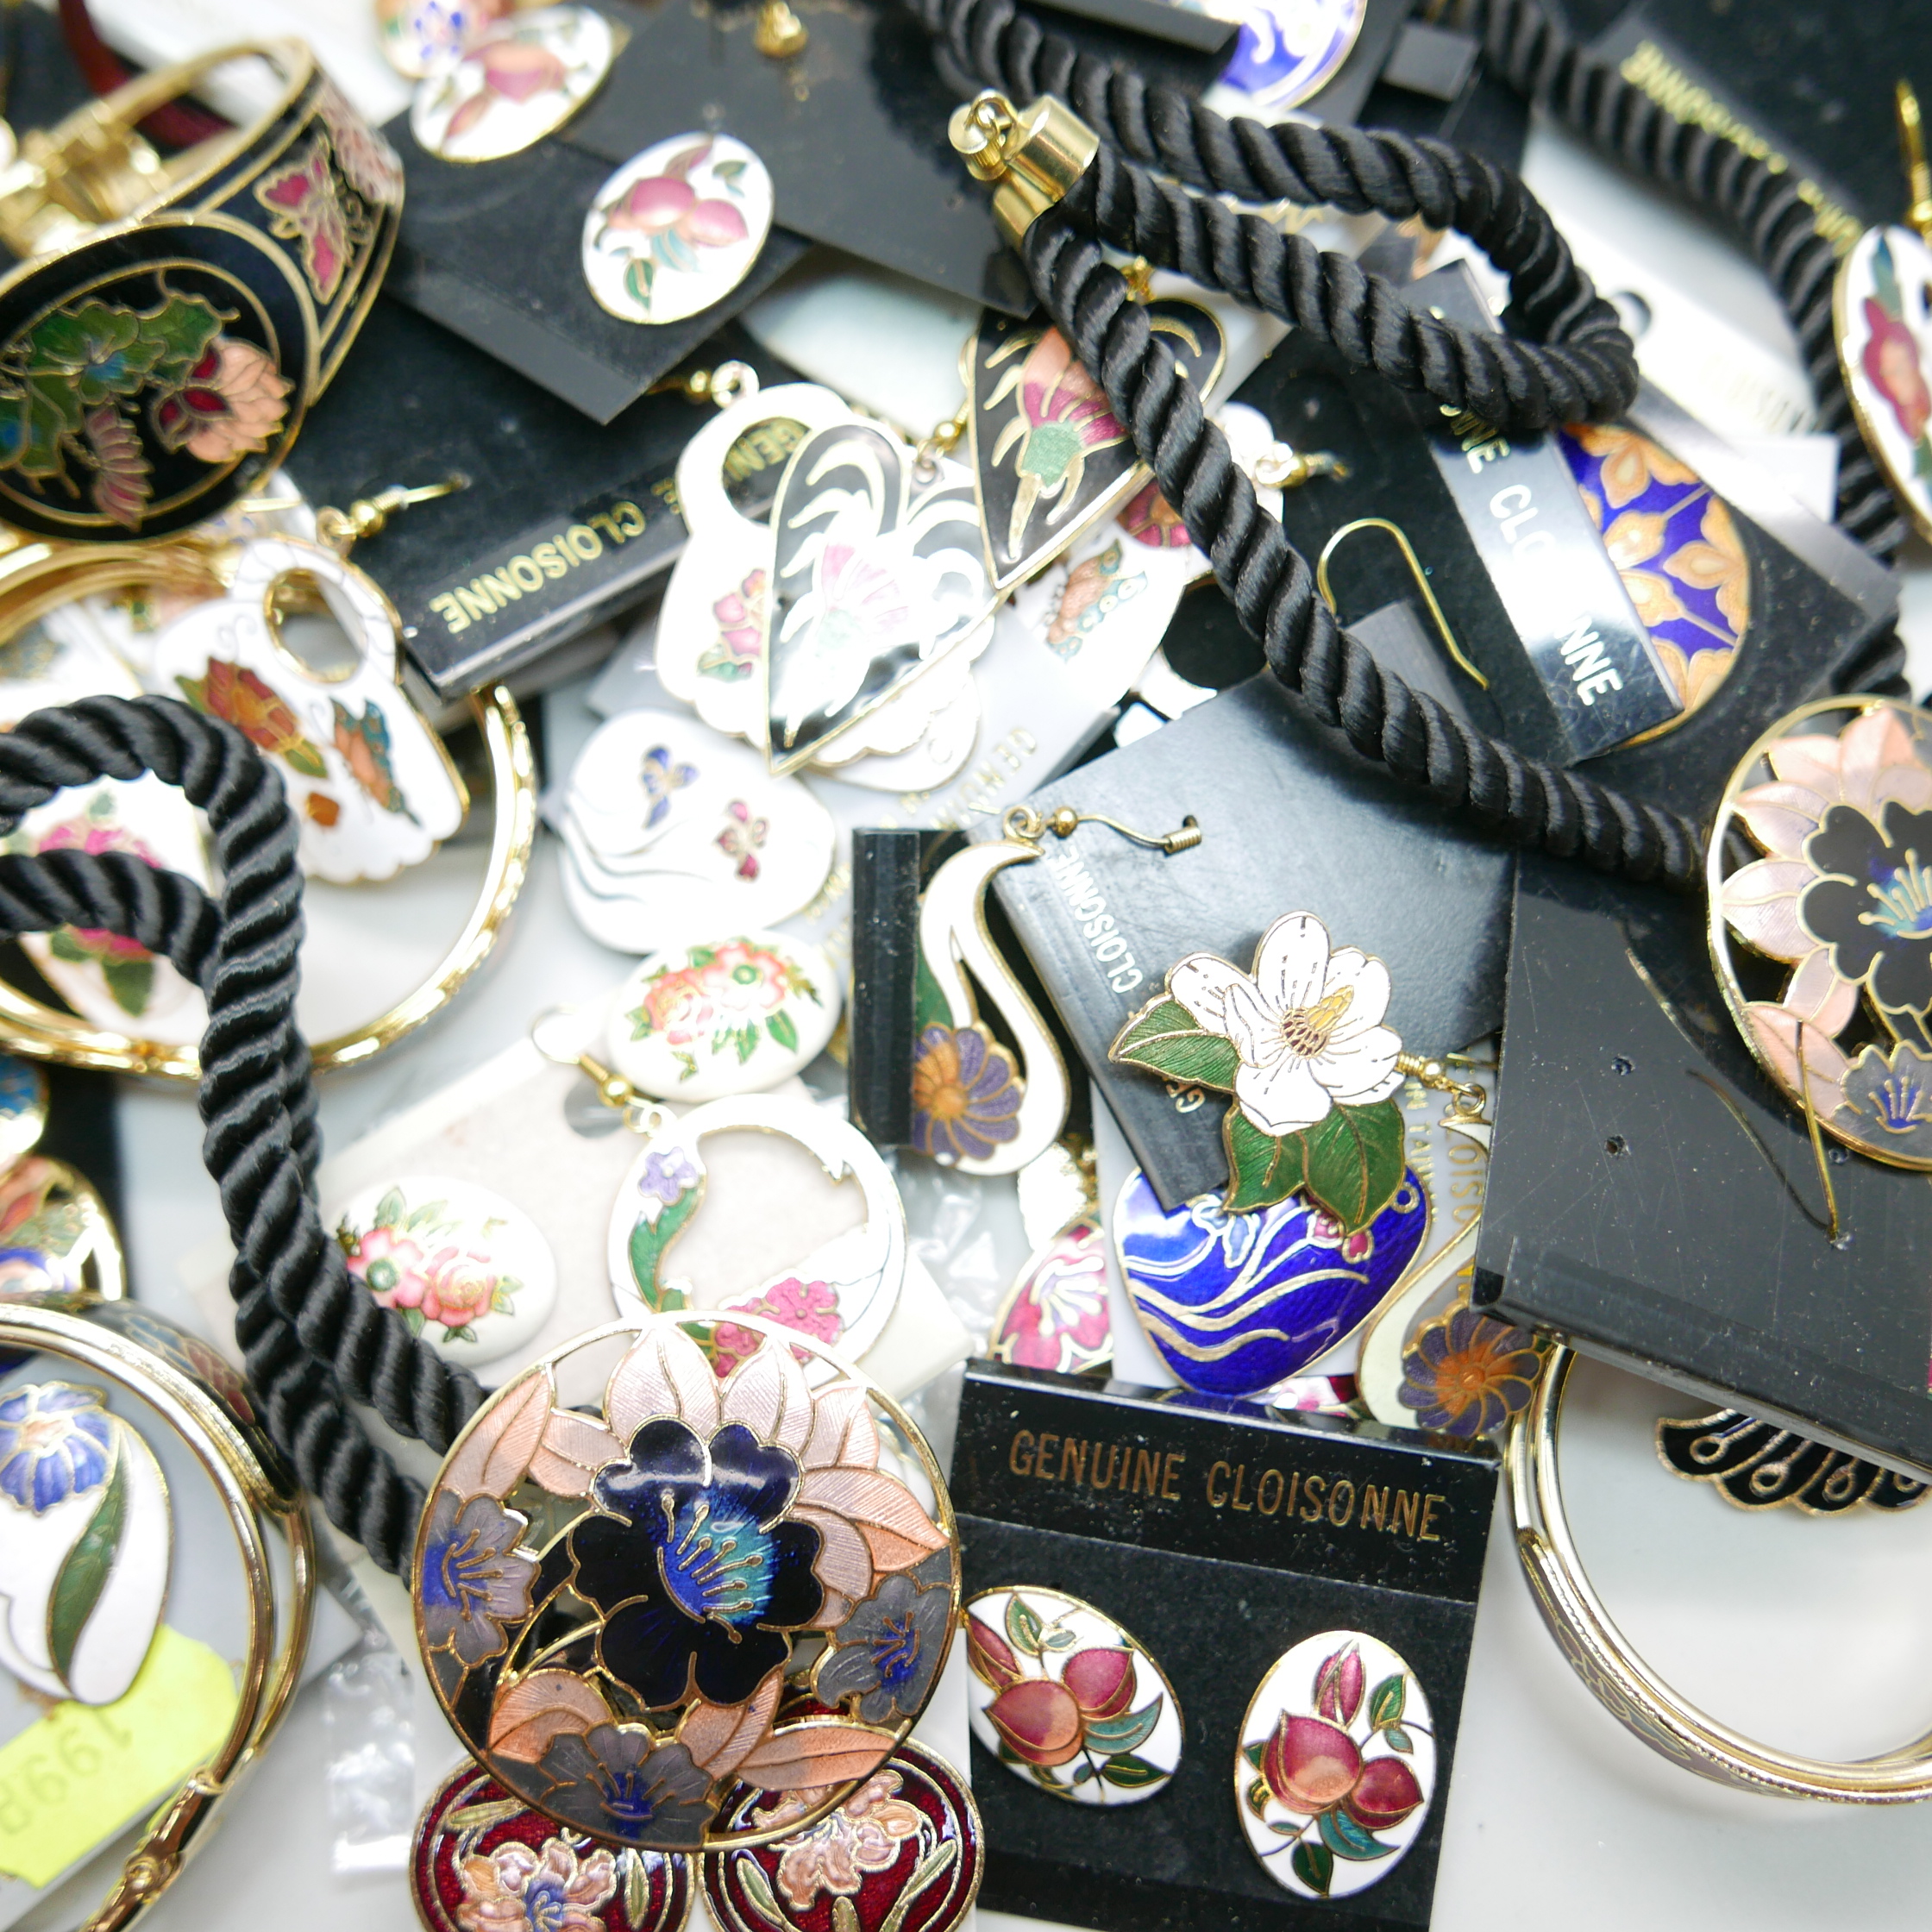 A collection of cloisonne jewellery, bracelets, earrings and necklaces - Image 2 of 3